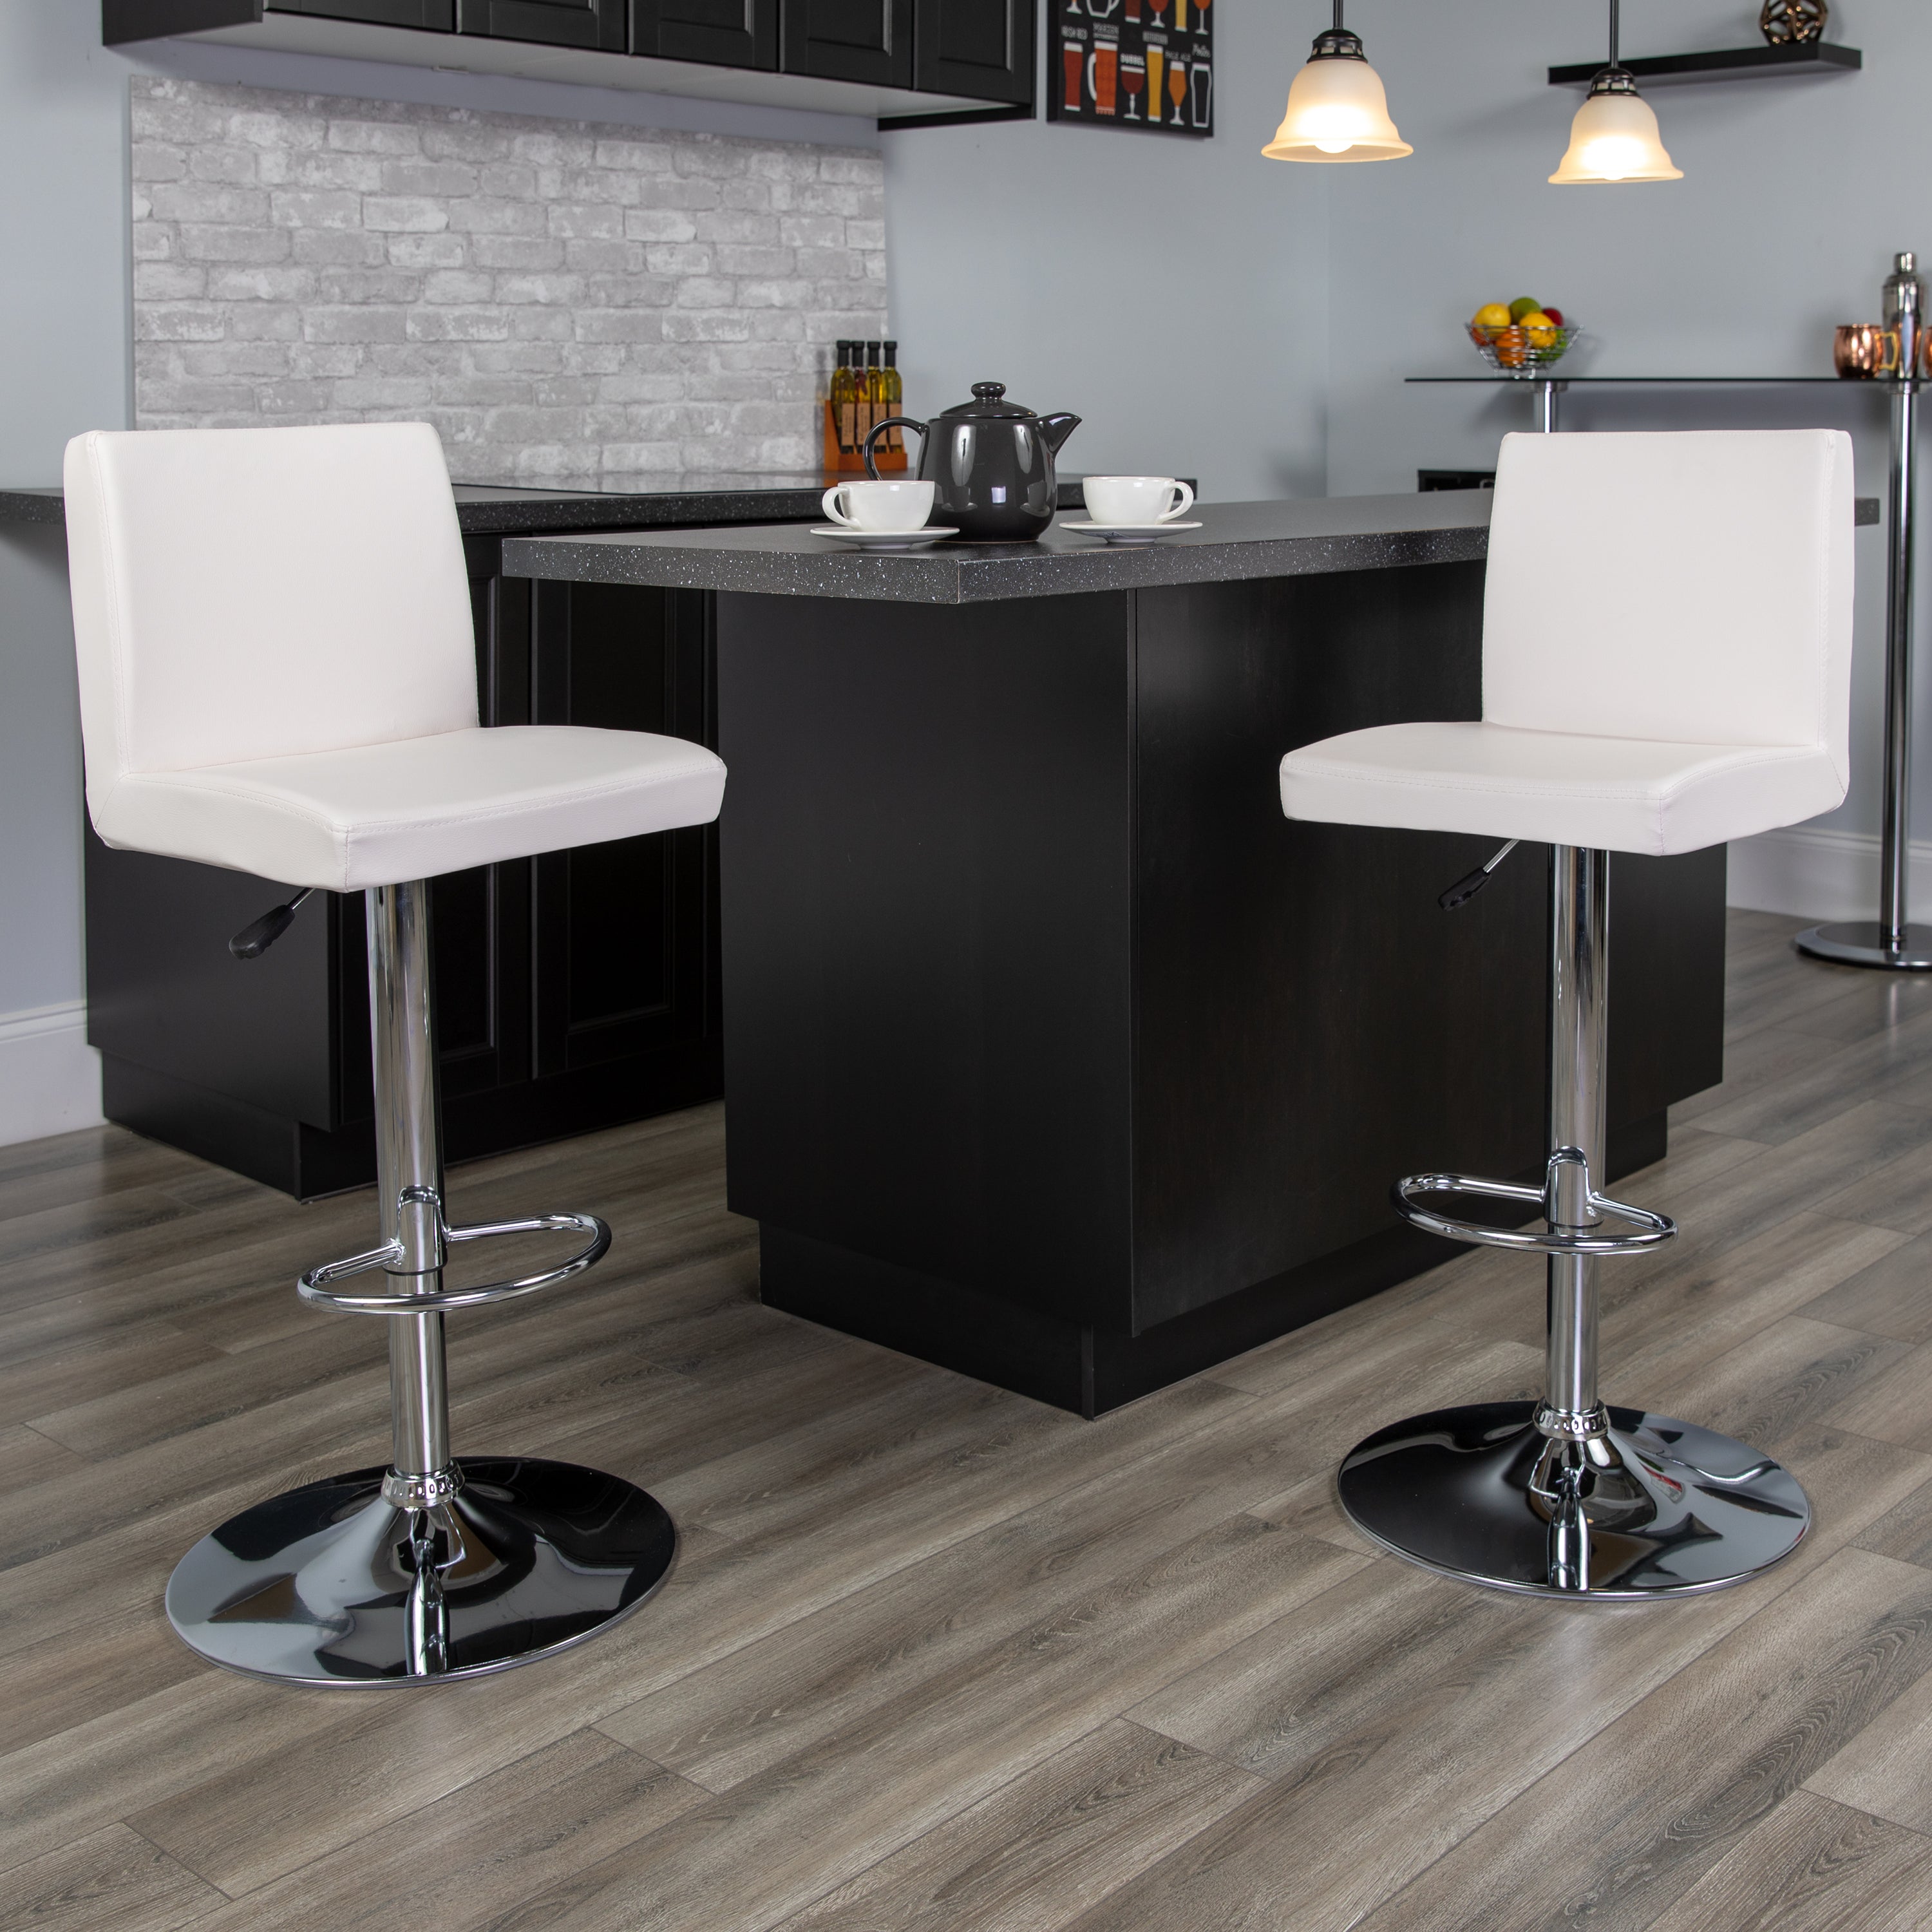 Contemporary Vinyl Adjustable Height Barstool with Panel Back and Chrome Base-Bar Stool-Flash Furniture-Wall2Wall Furnishings